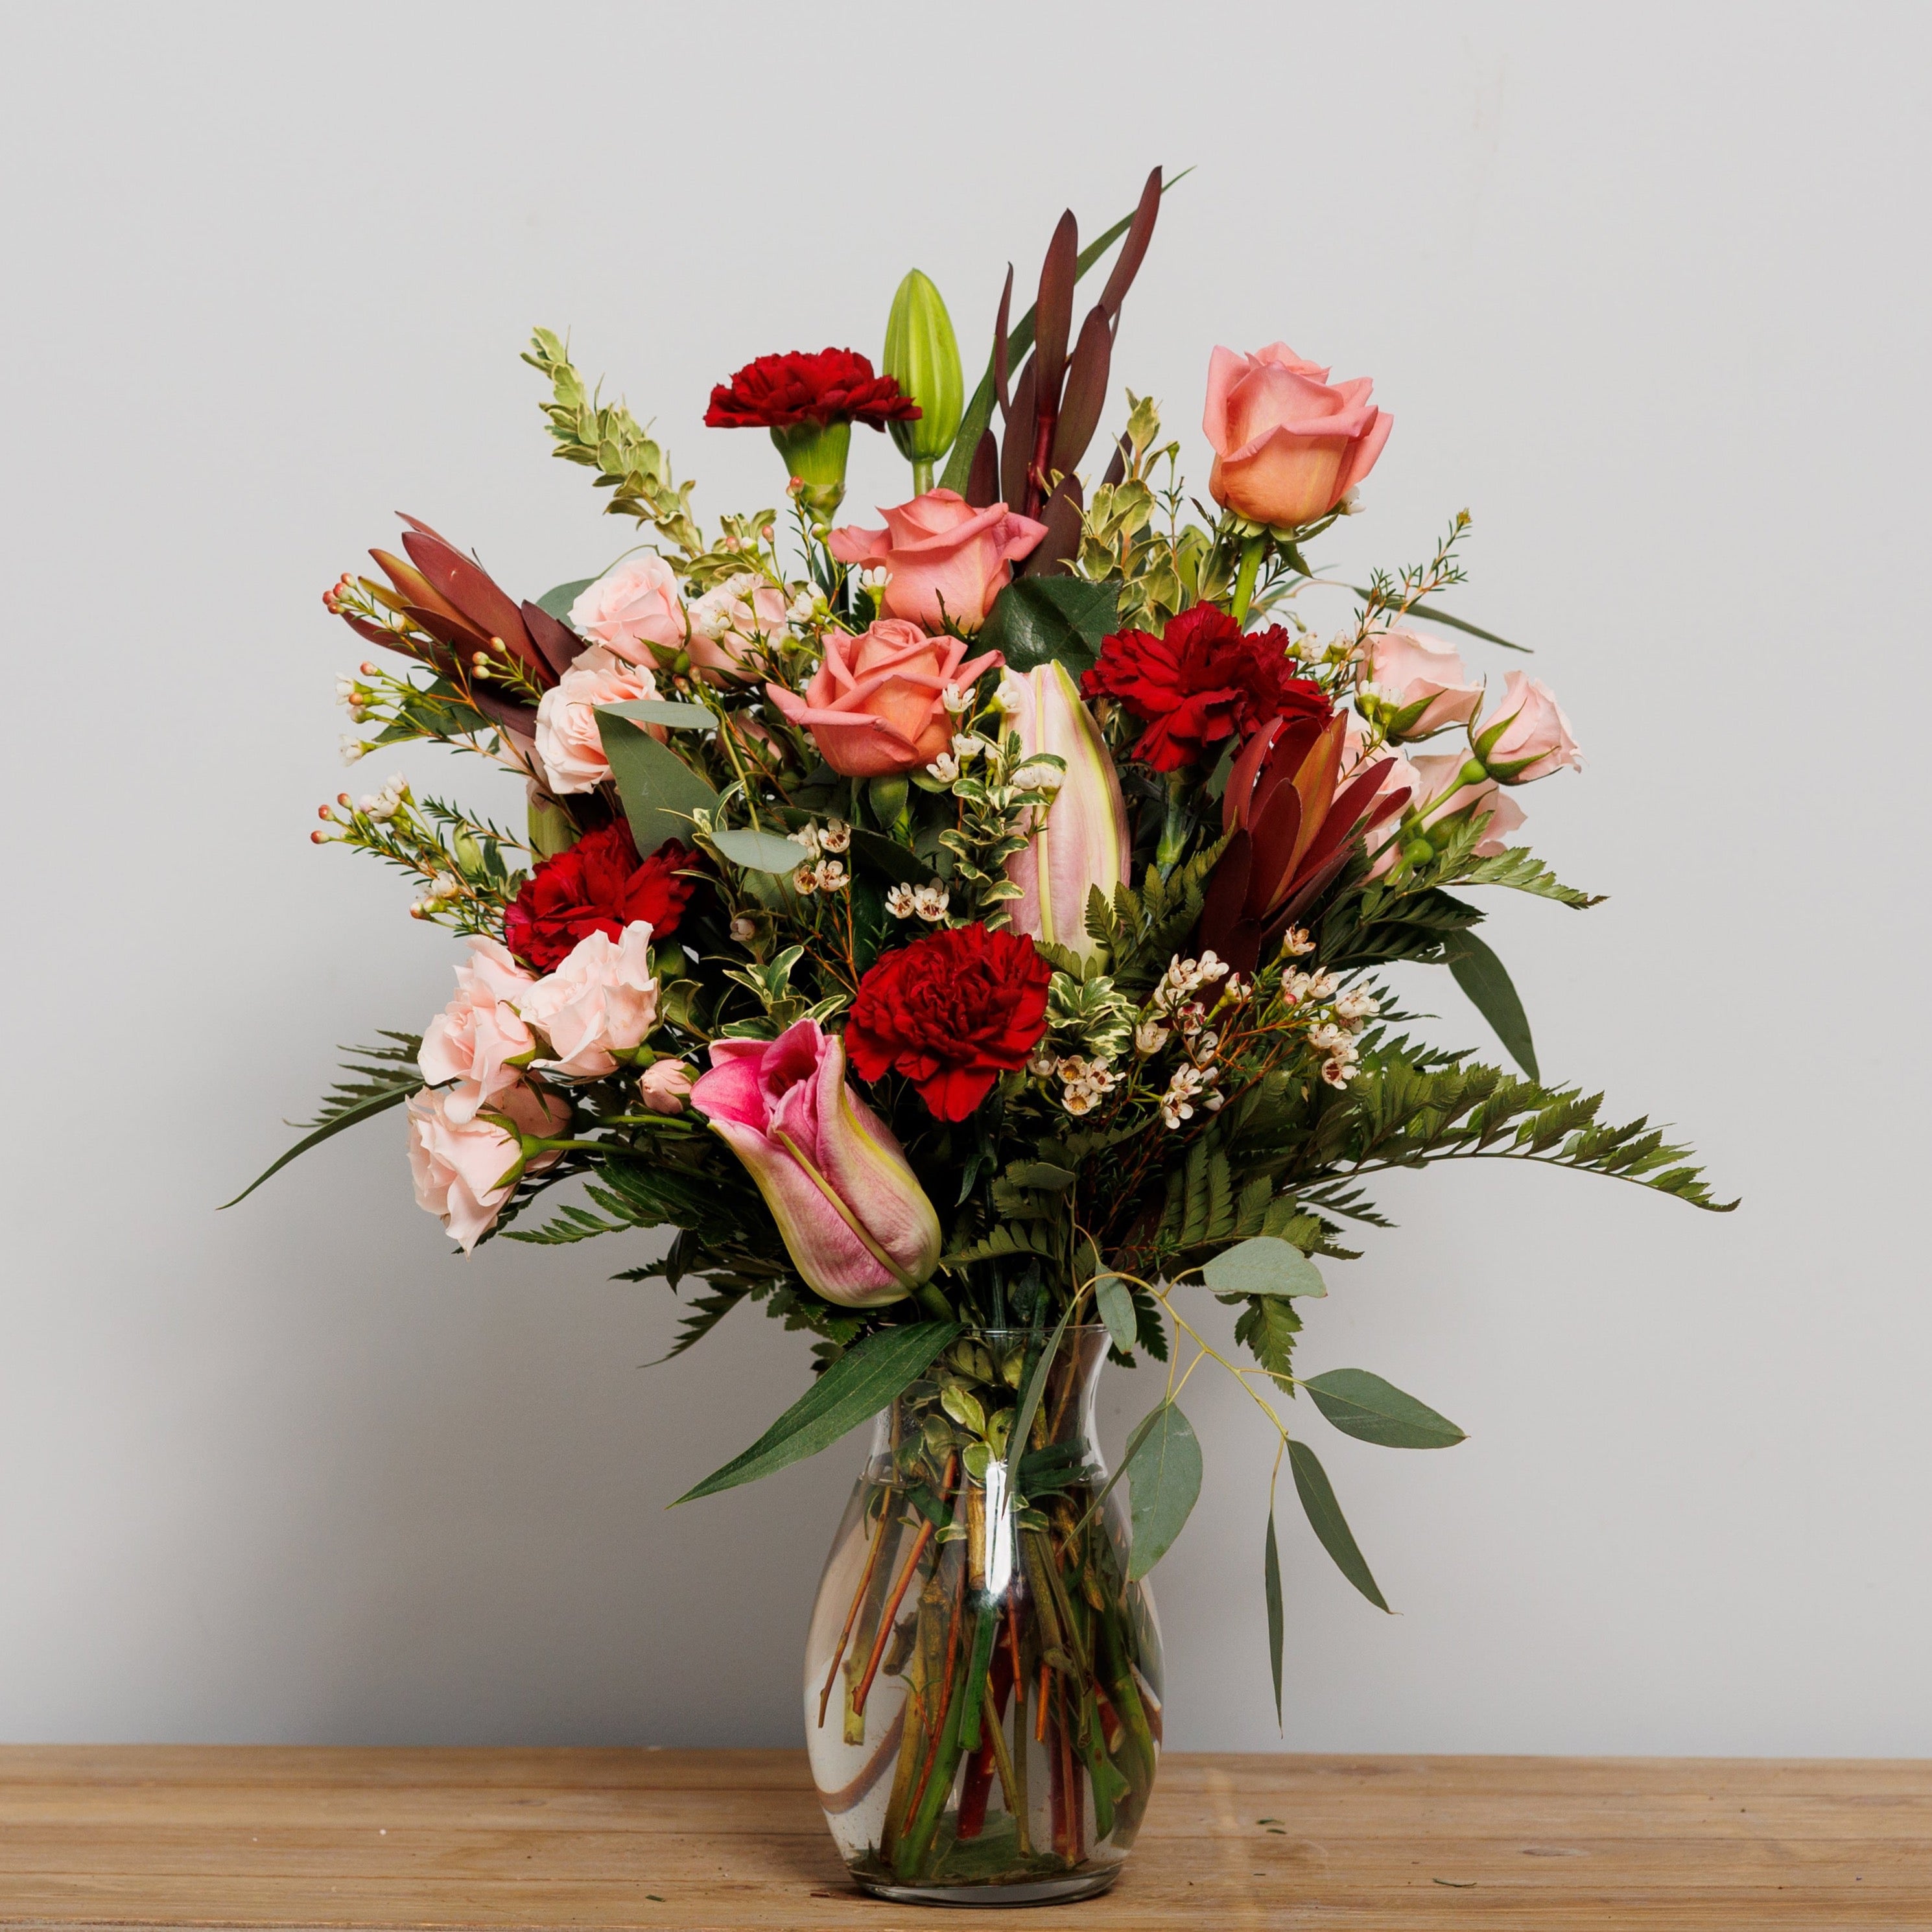 A vase arrangement with dark red carnations and lilies and pink roses.